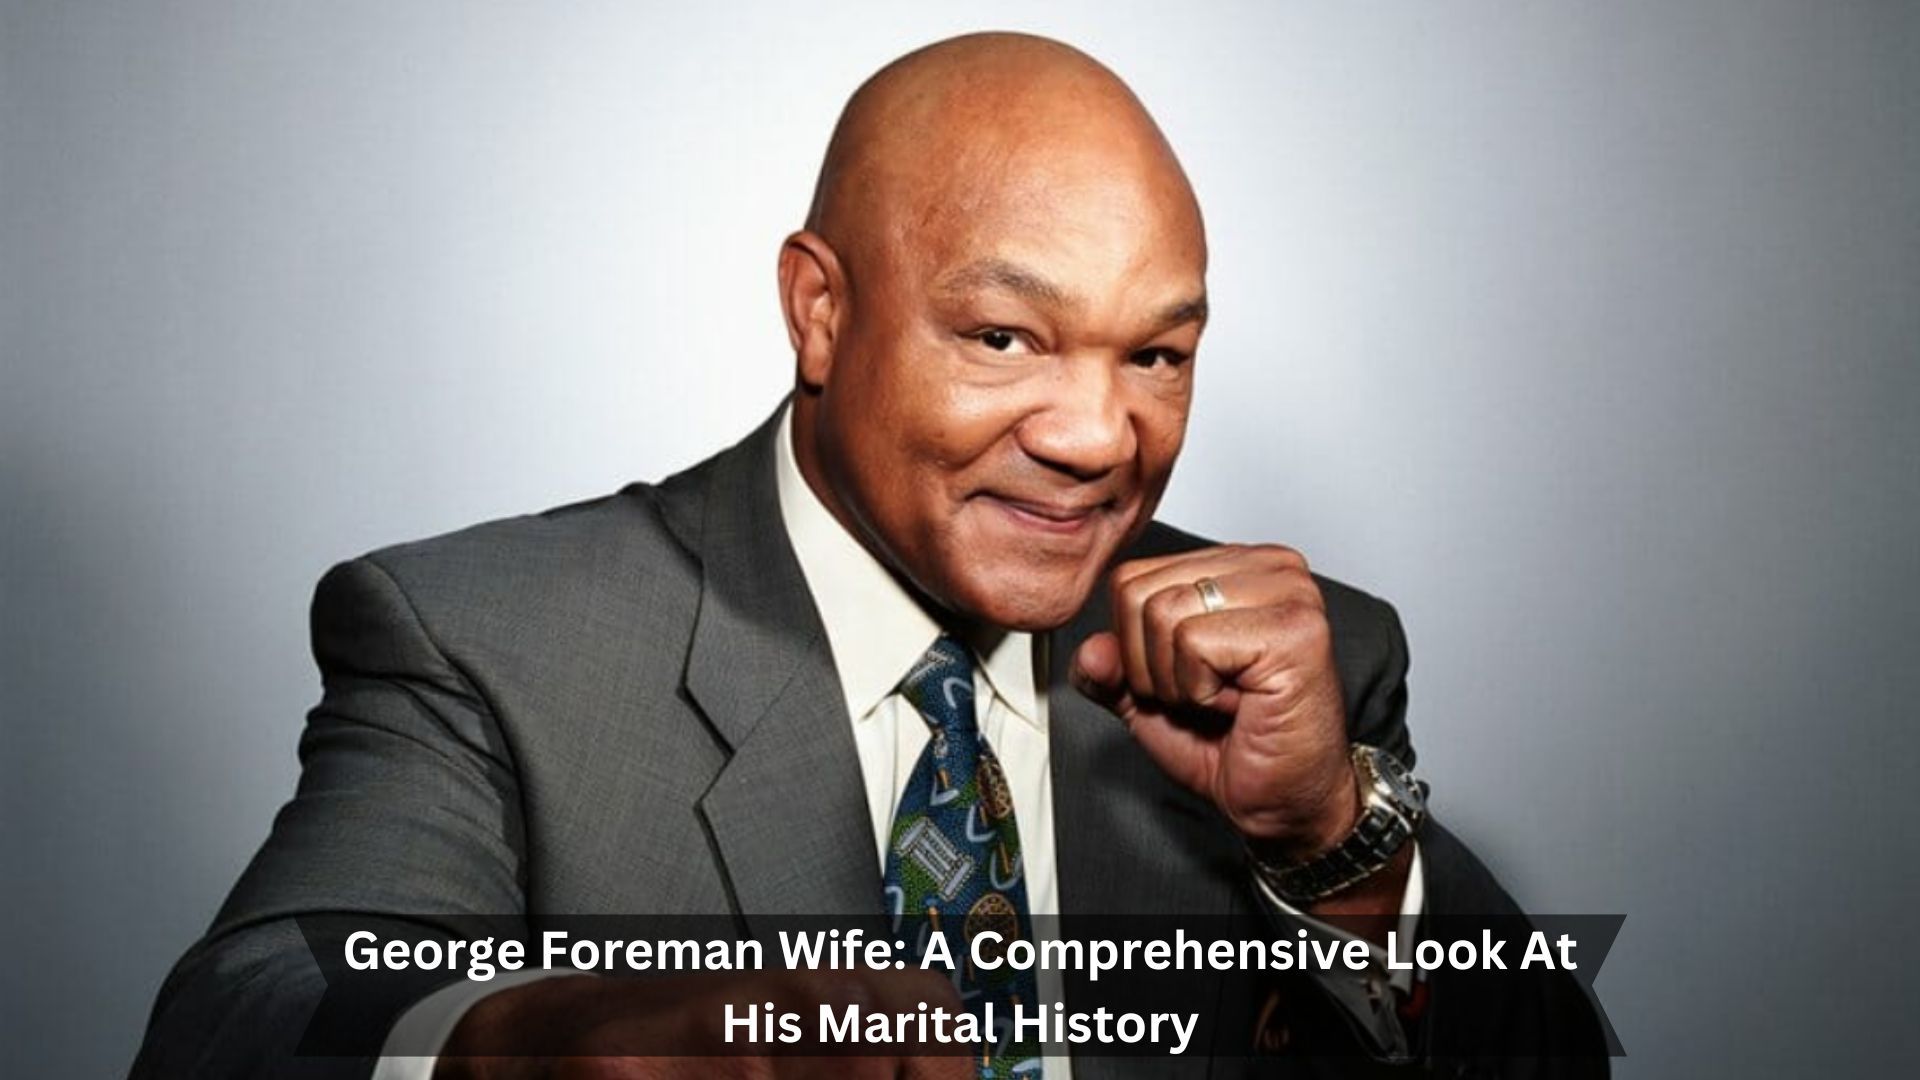 George-Foreman-Wife-A-Comprehensive-Look-At-His-Marital-History